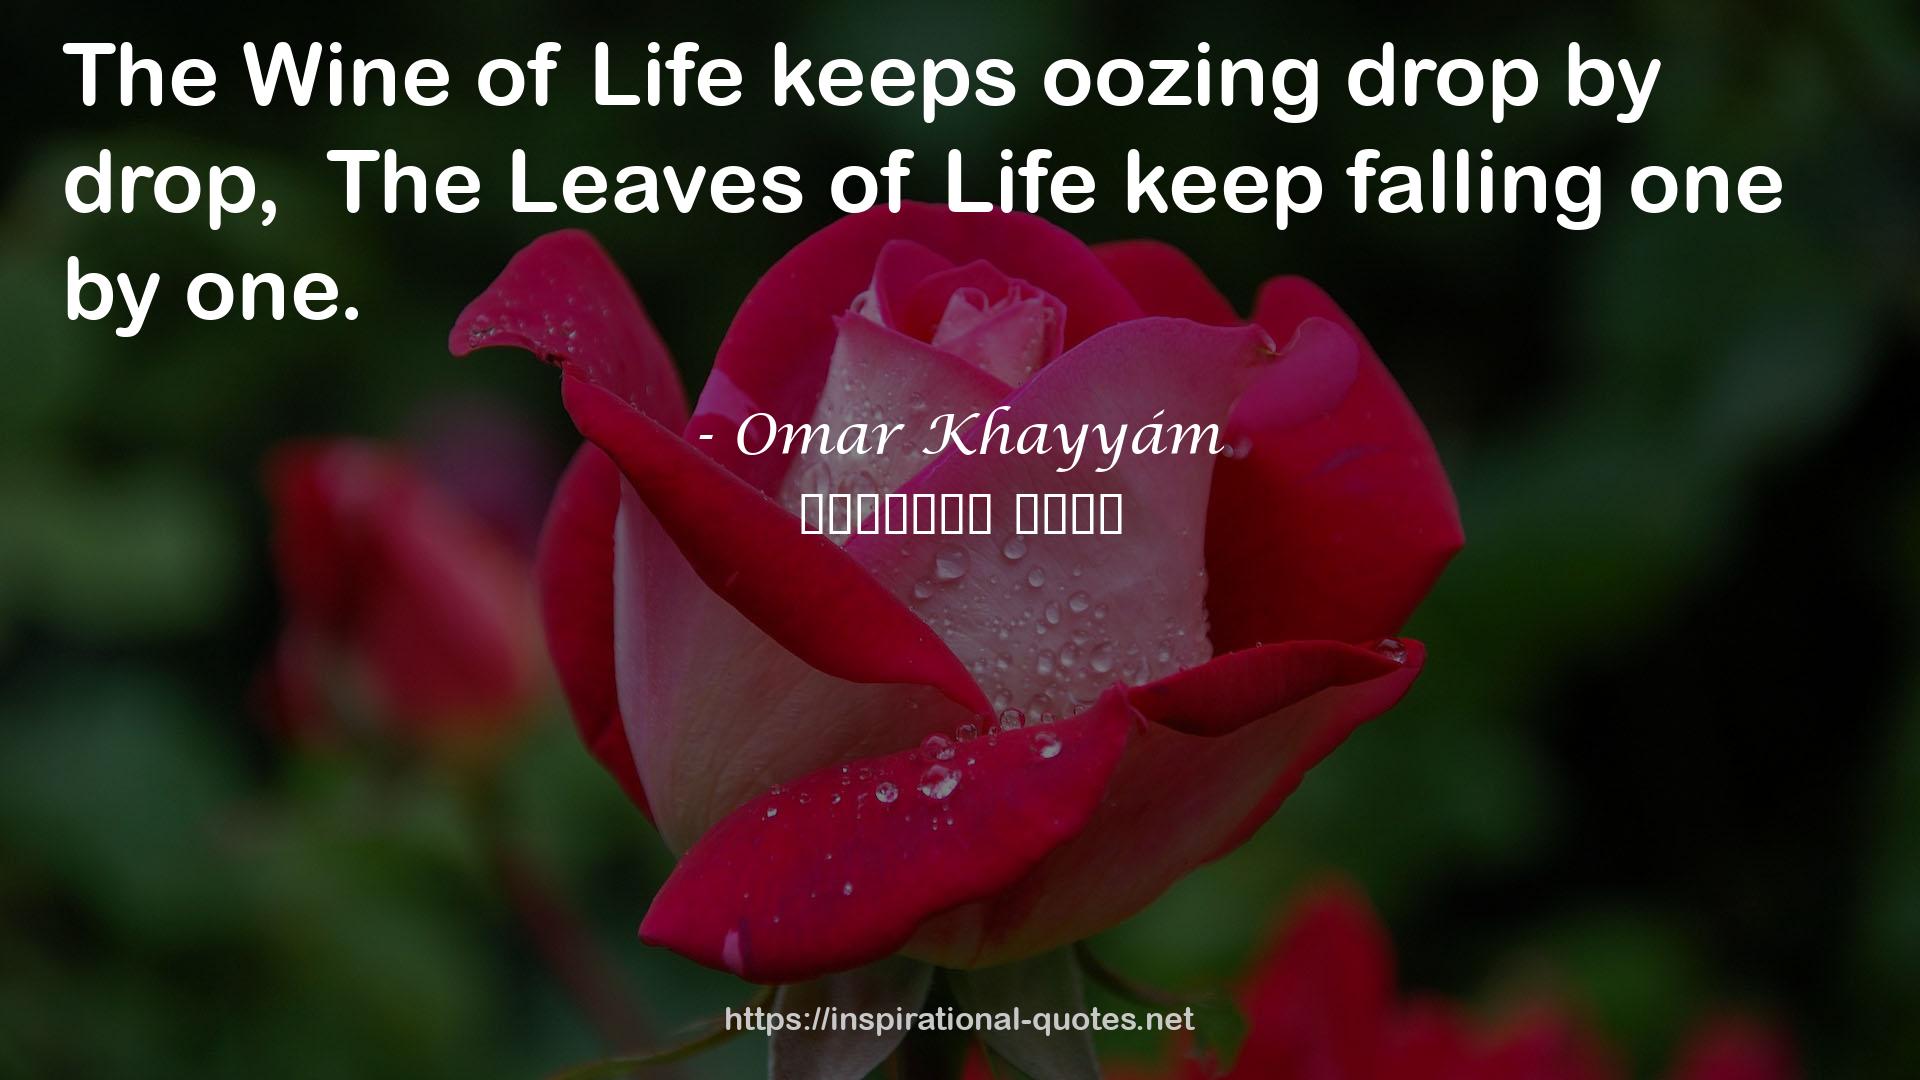 oozing drop  QUOTES